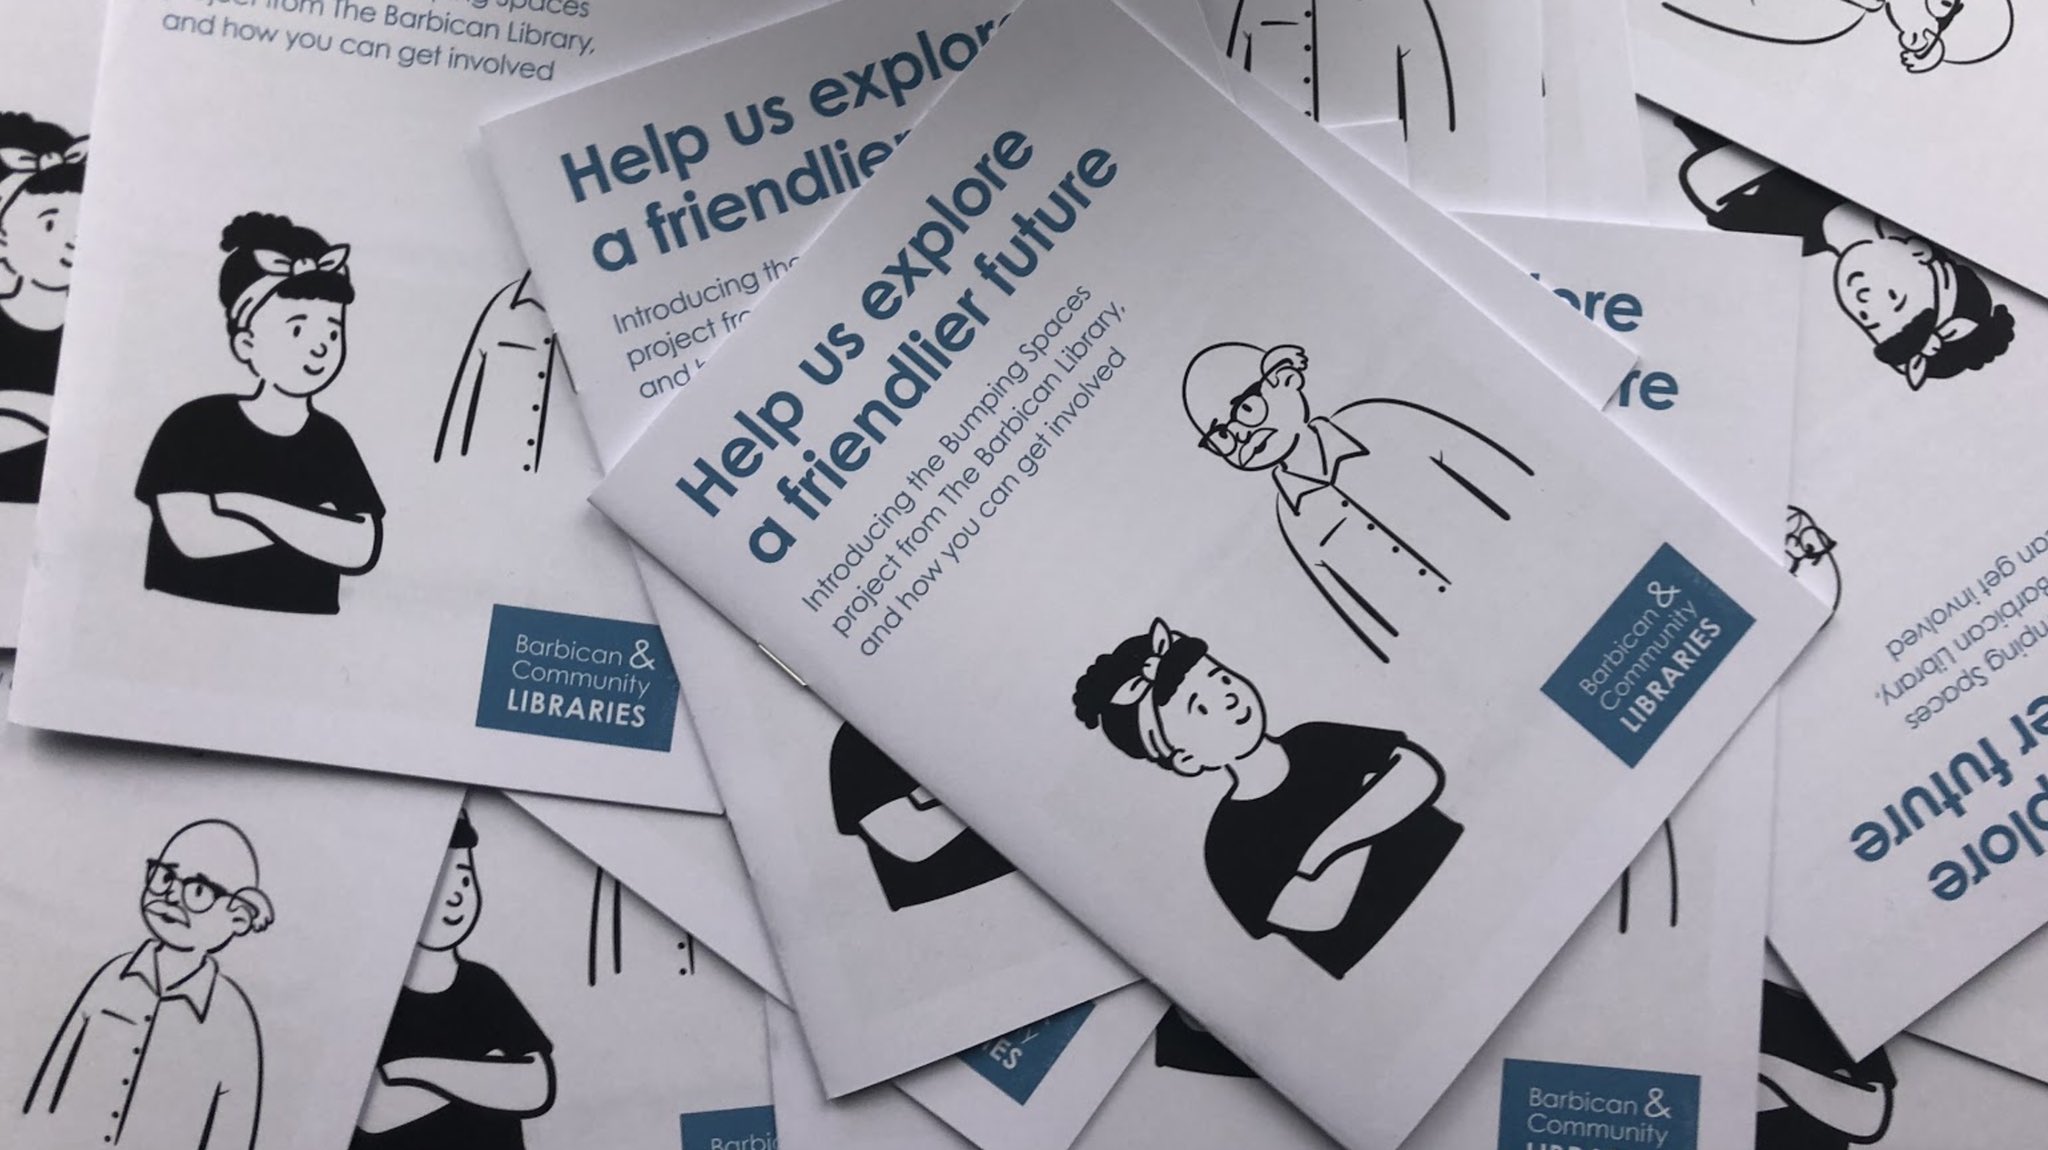 Leaflets for the Bumping Spaces project showing blue lettering on a white background